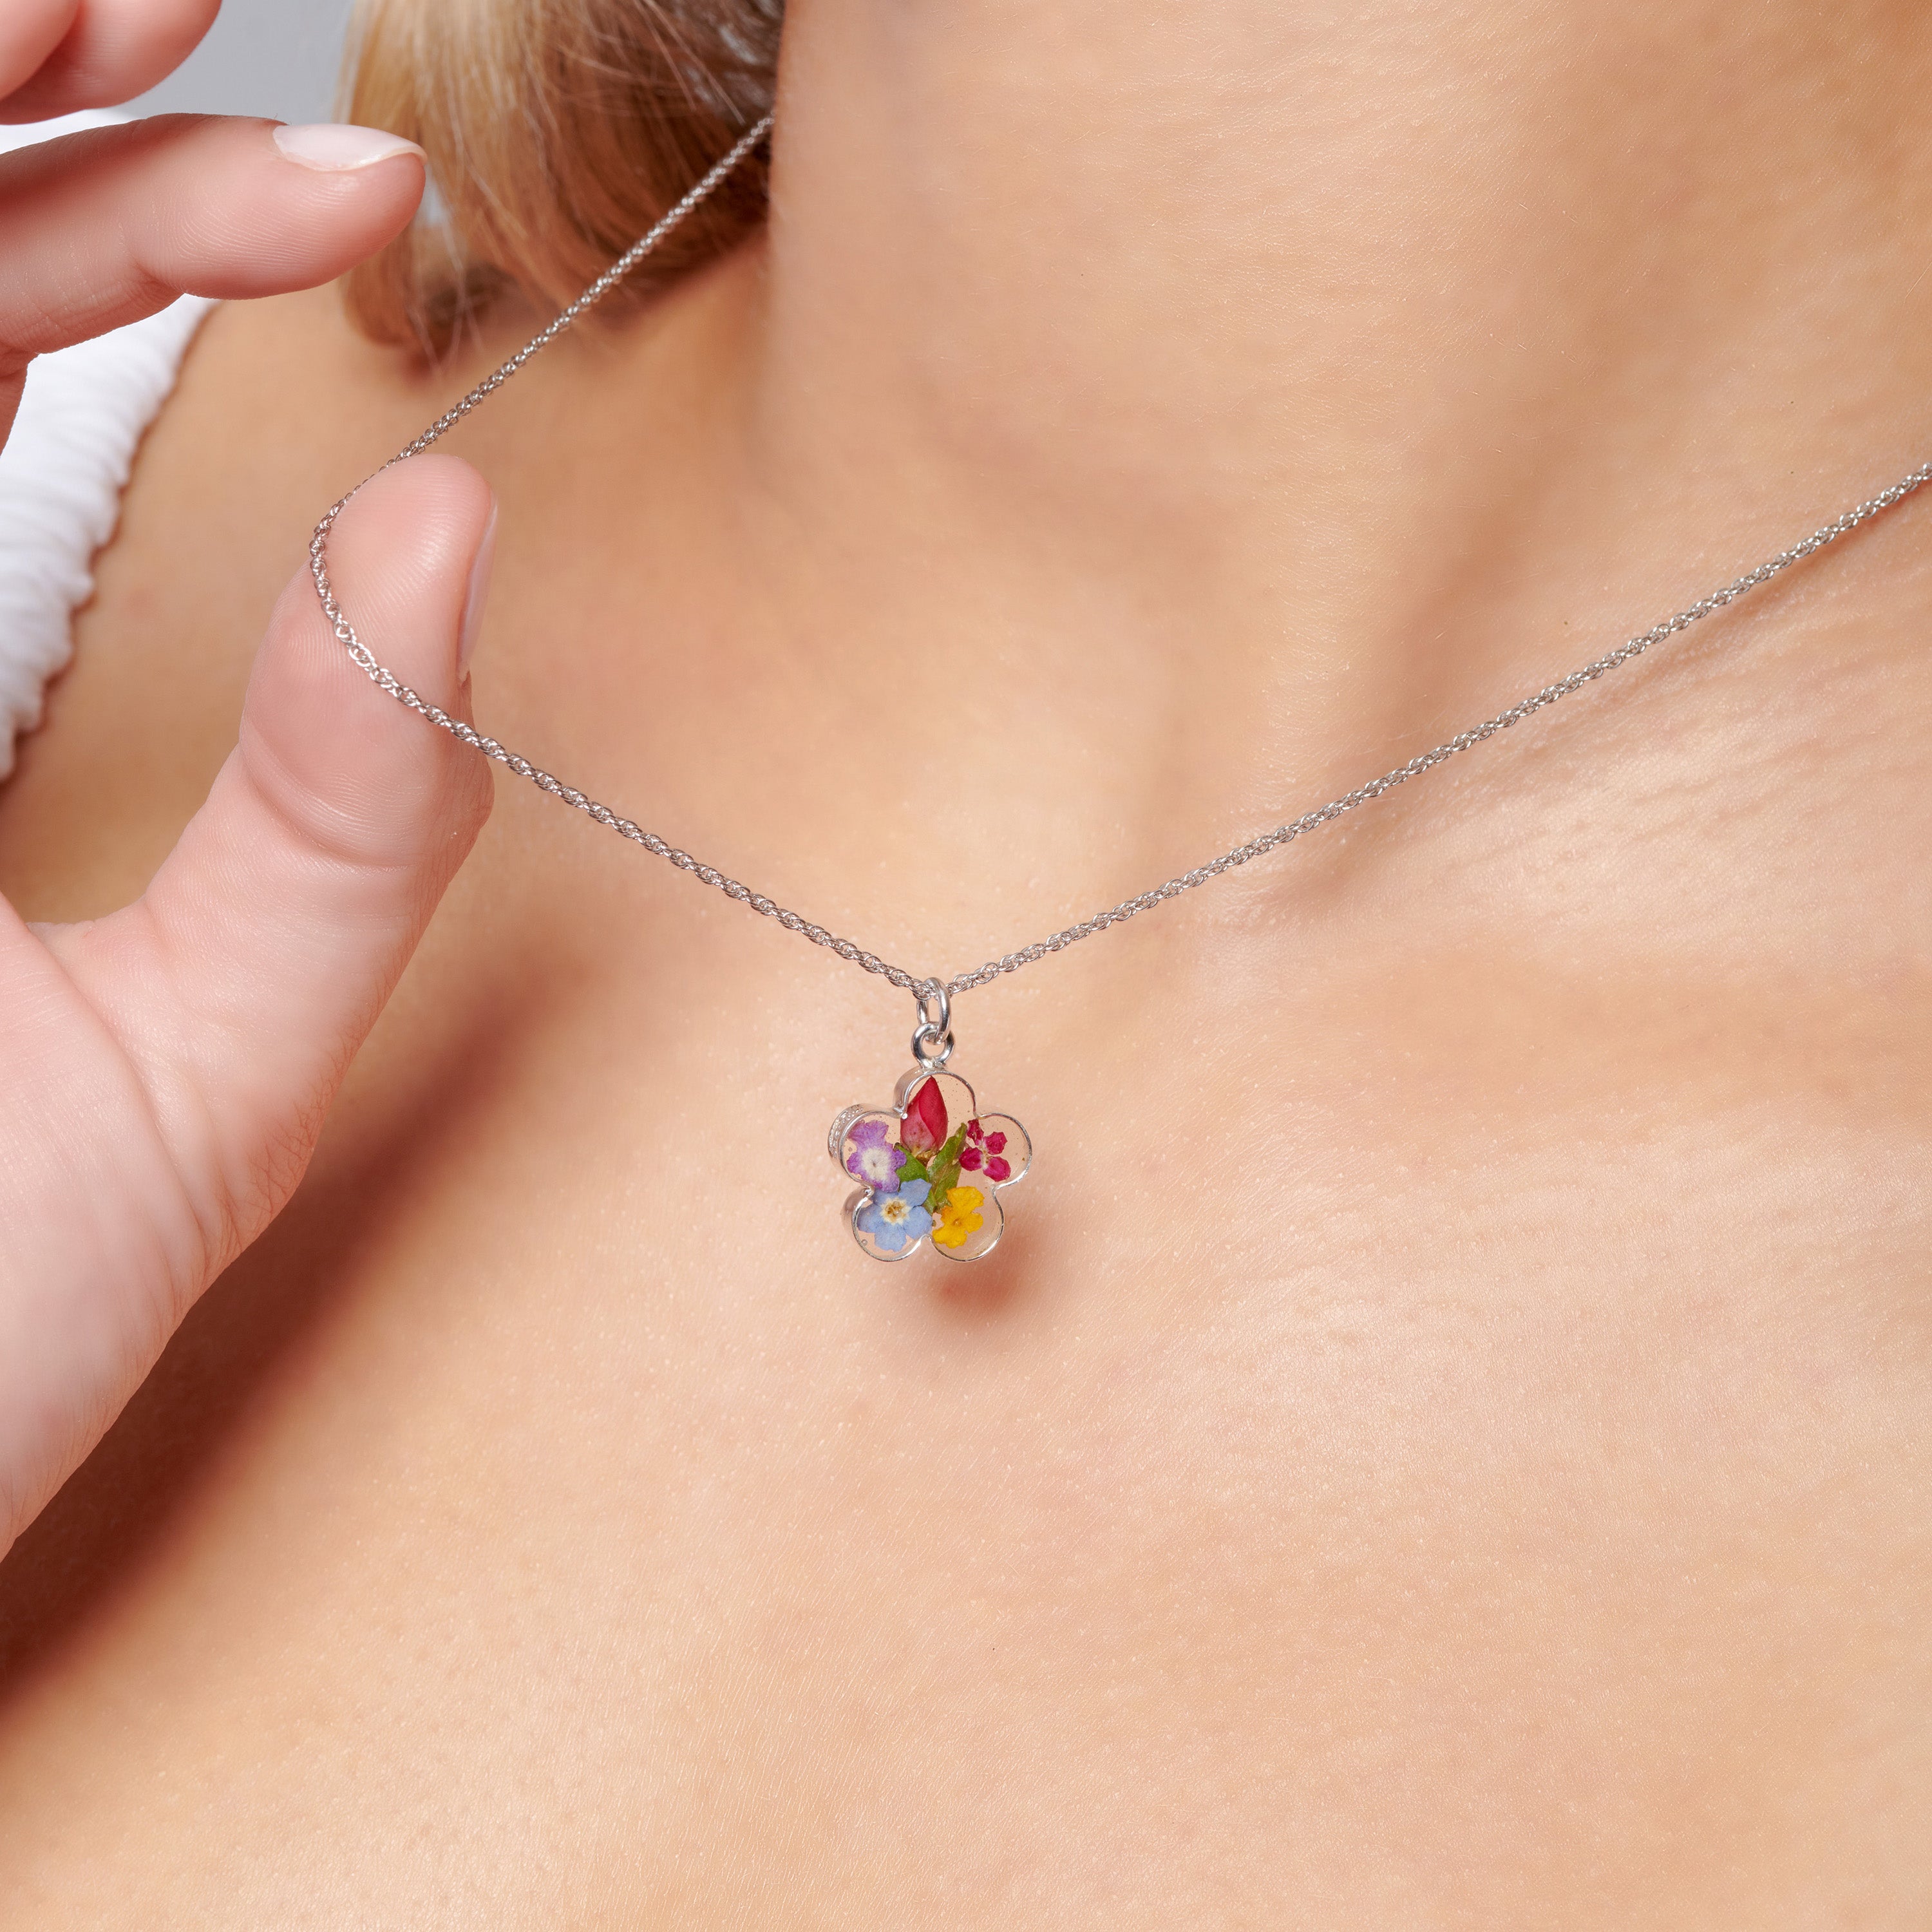 Dira Necklace with Multi Colored Flowers